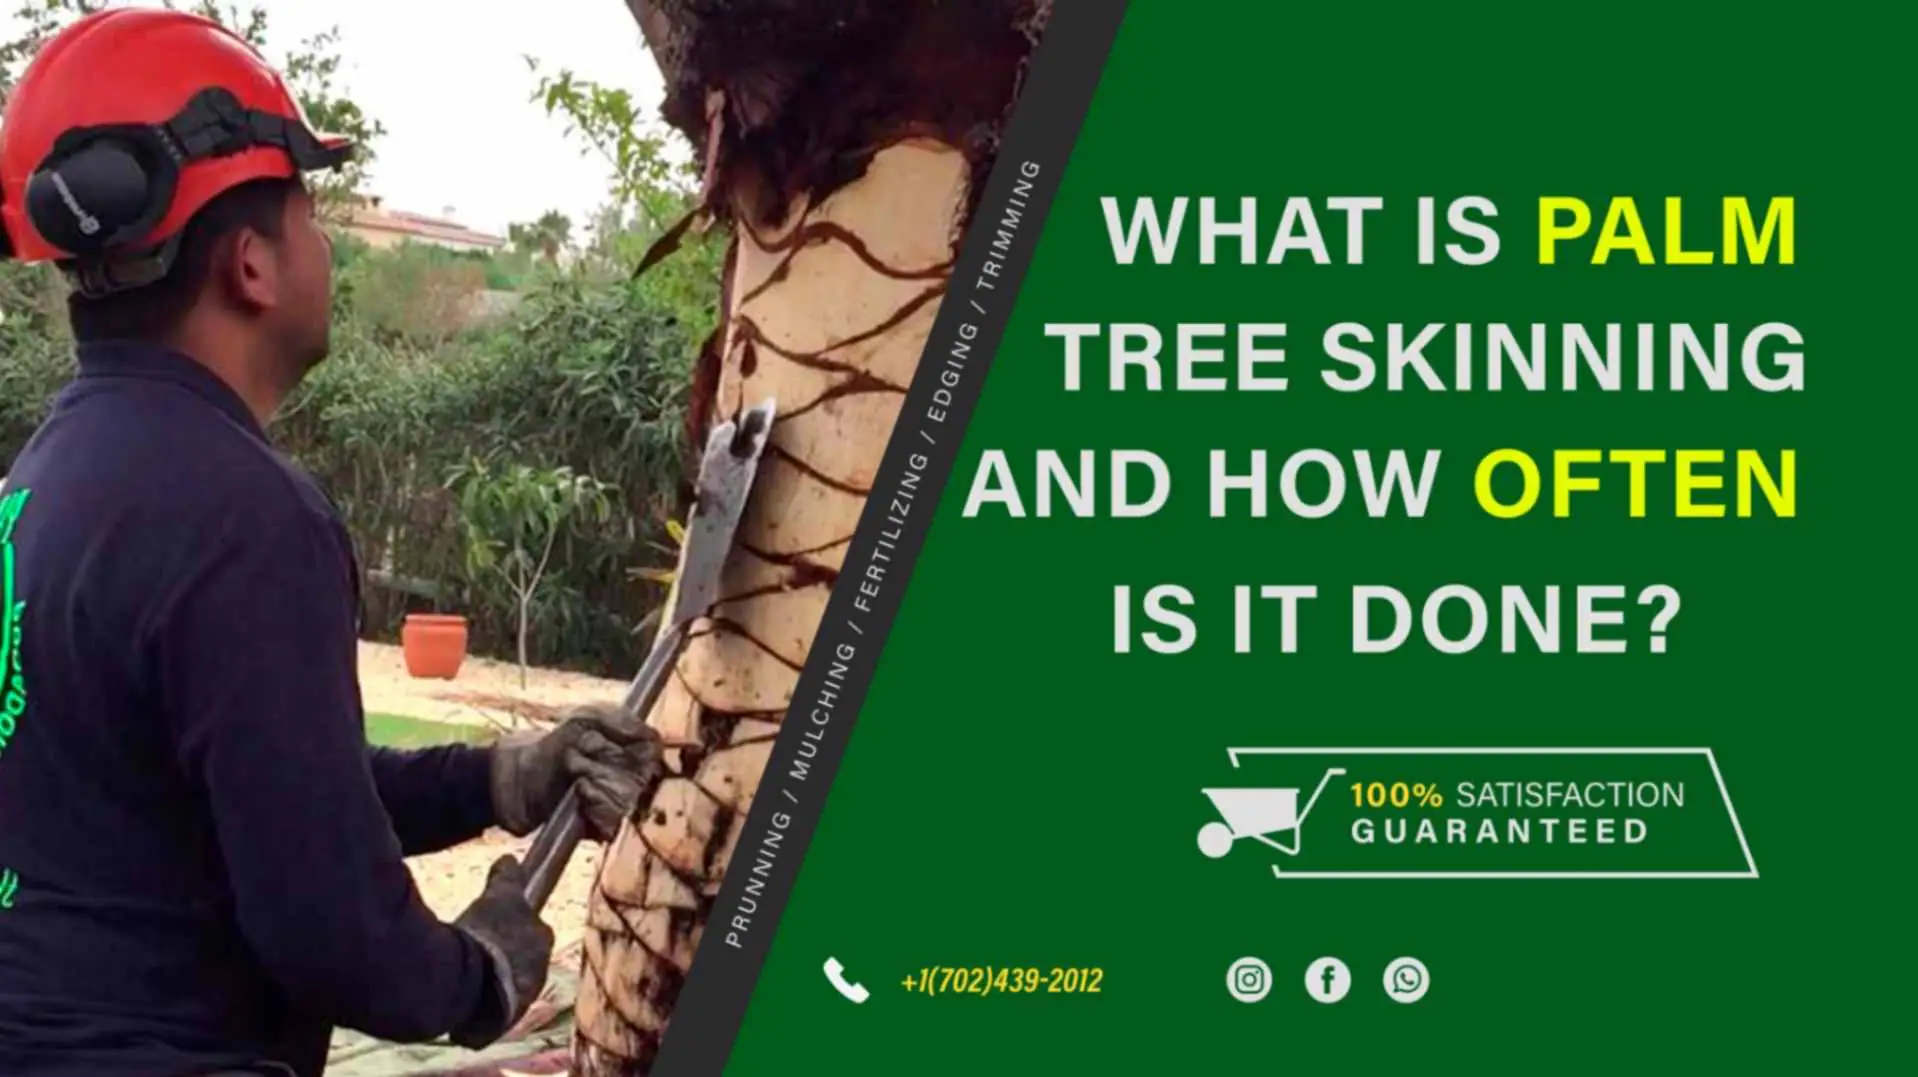 What is Palm Tree Skinning, and How Often is it Done?